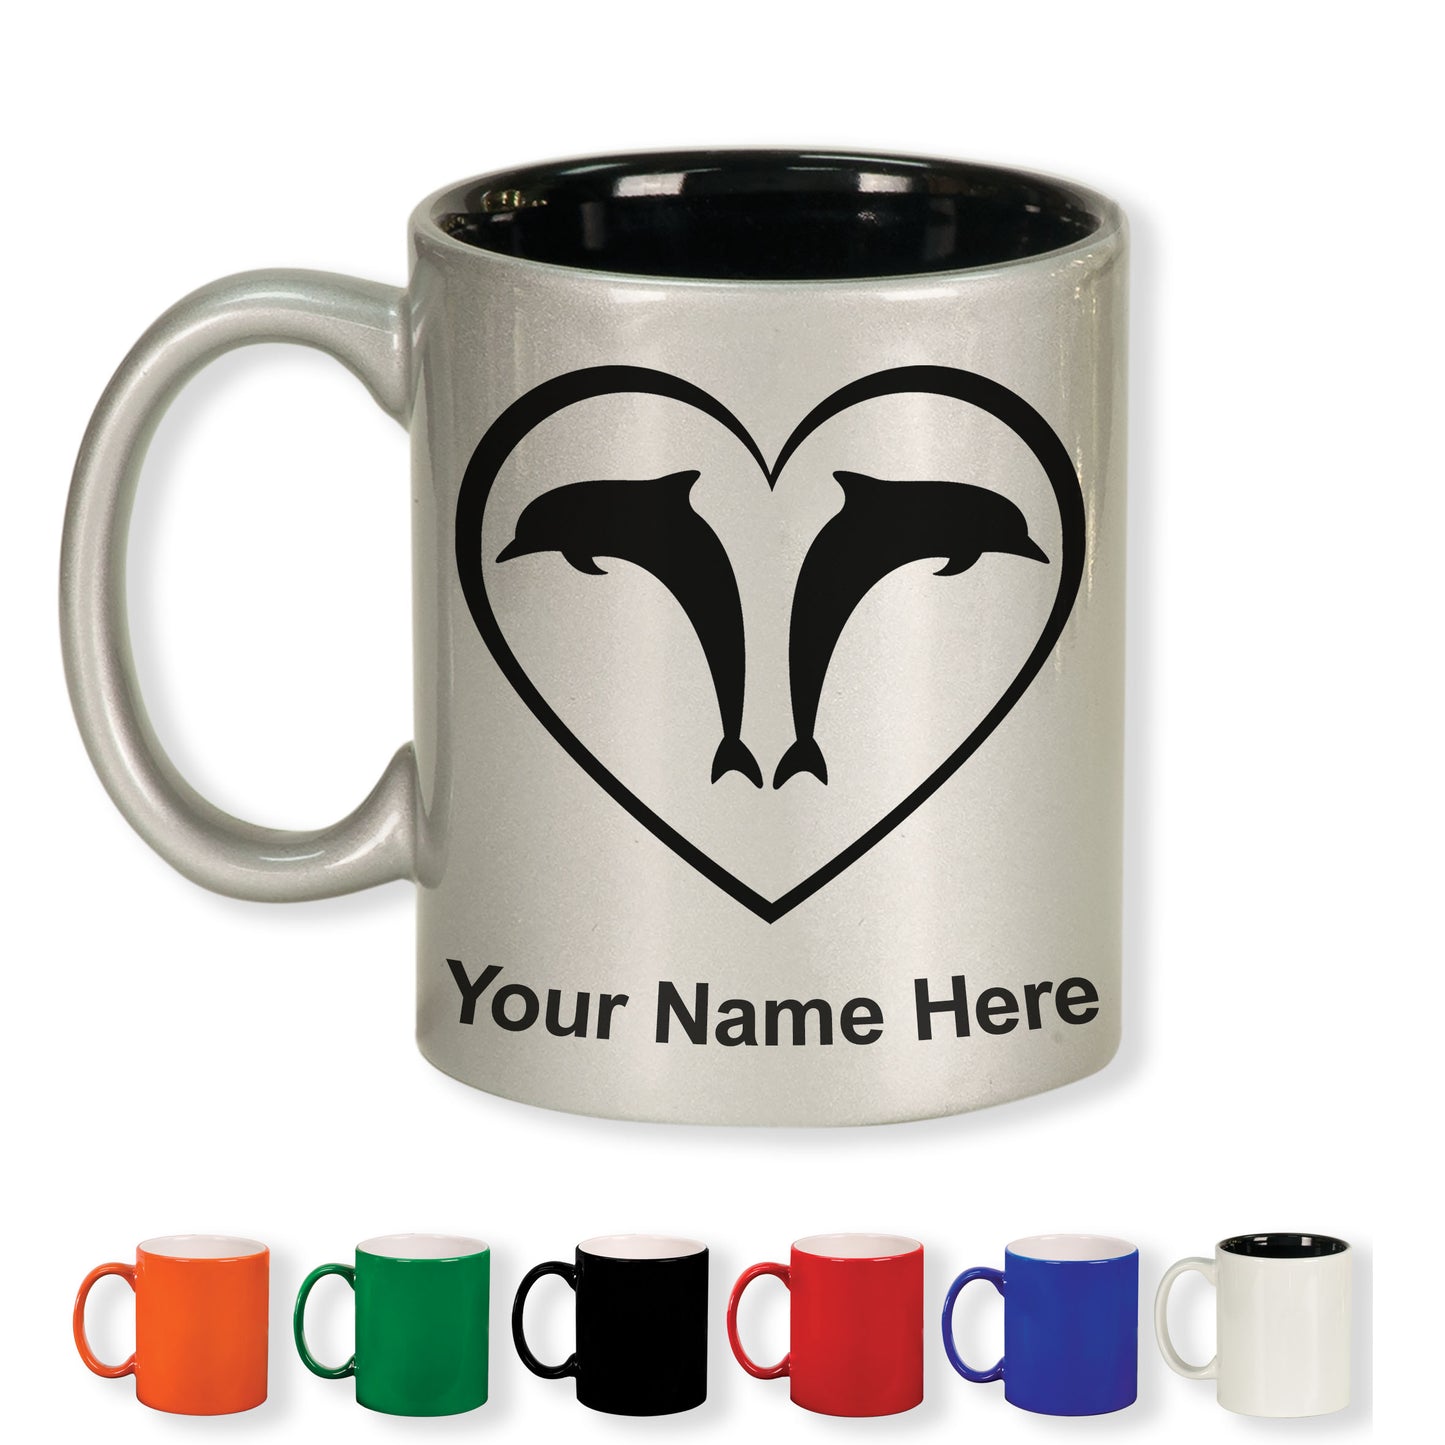 11oz Round Ceramic Coffee Mug, Dolphin Heart, Personalized Engraving Included